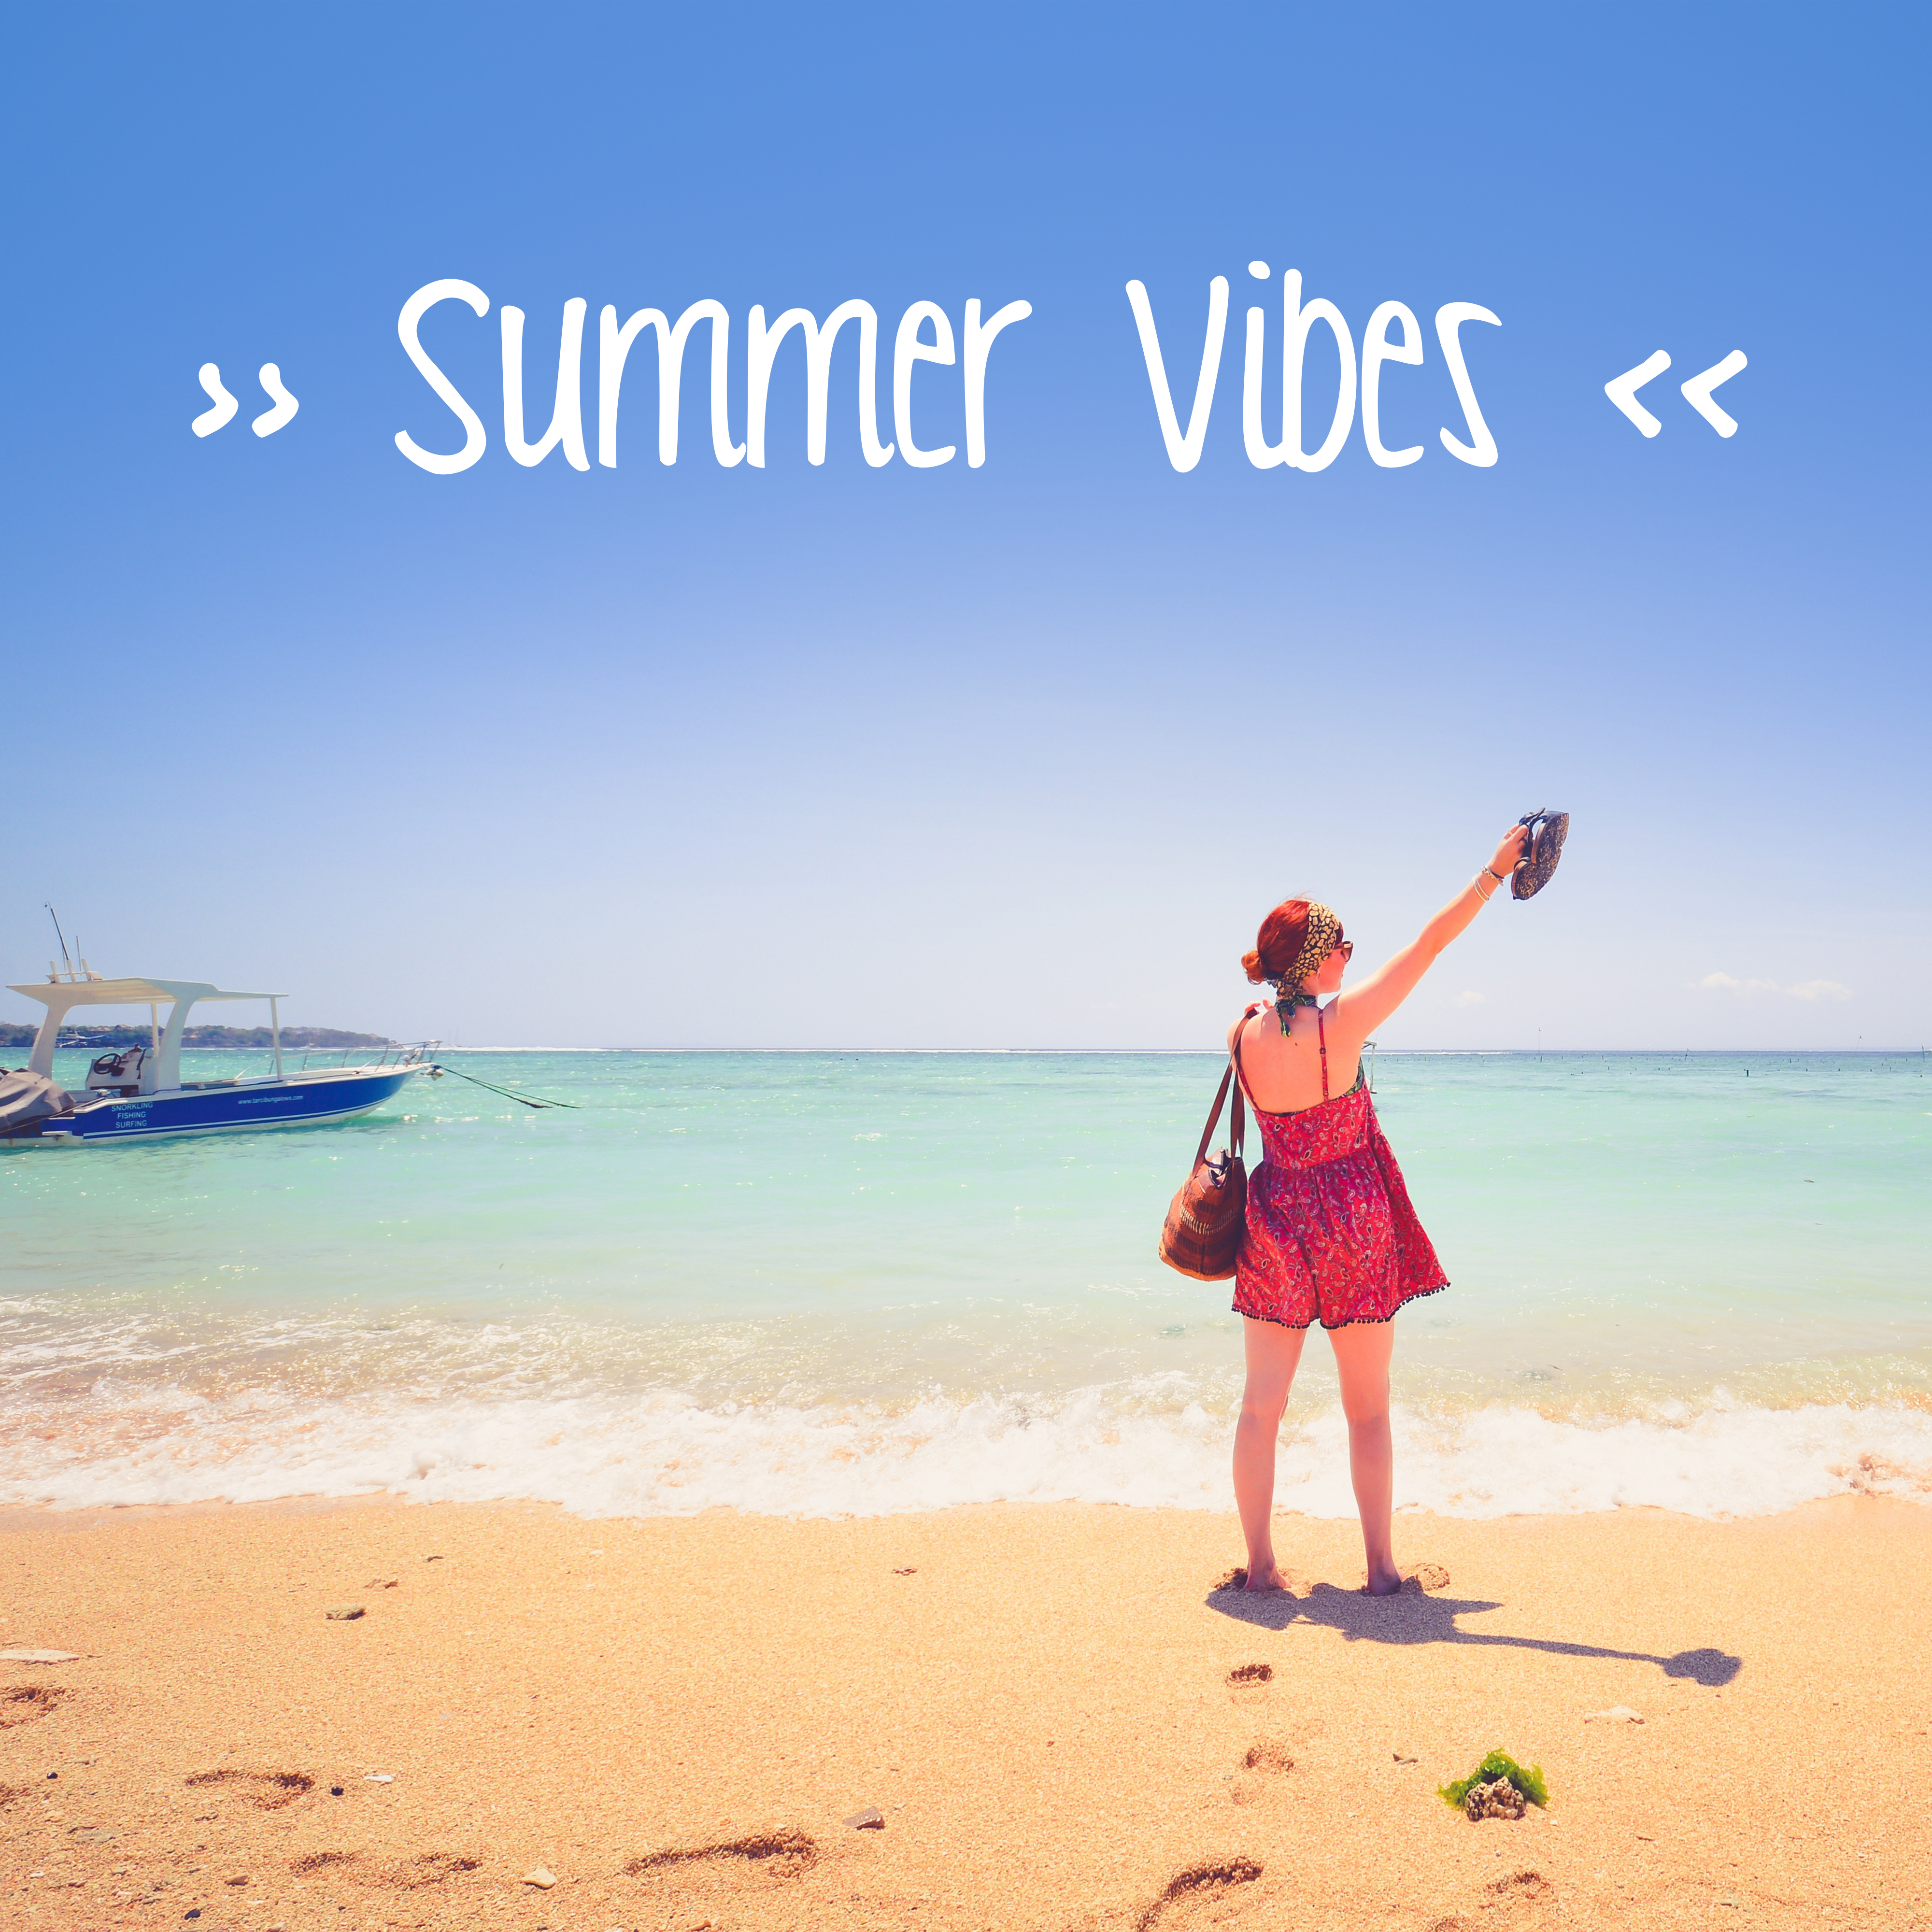 Summer Vibes – Holiday Chill Out Music, Good Energy, **** Chill, Electronic Music, Summer Chill, Music to Dance